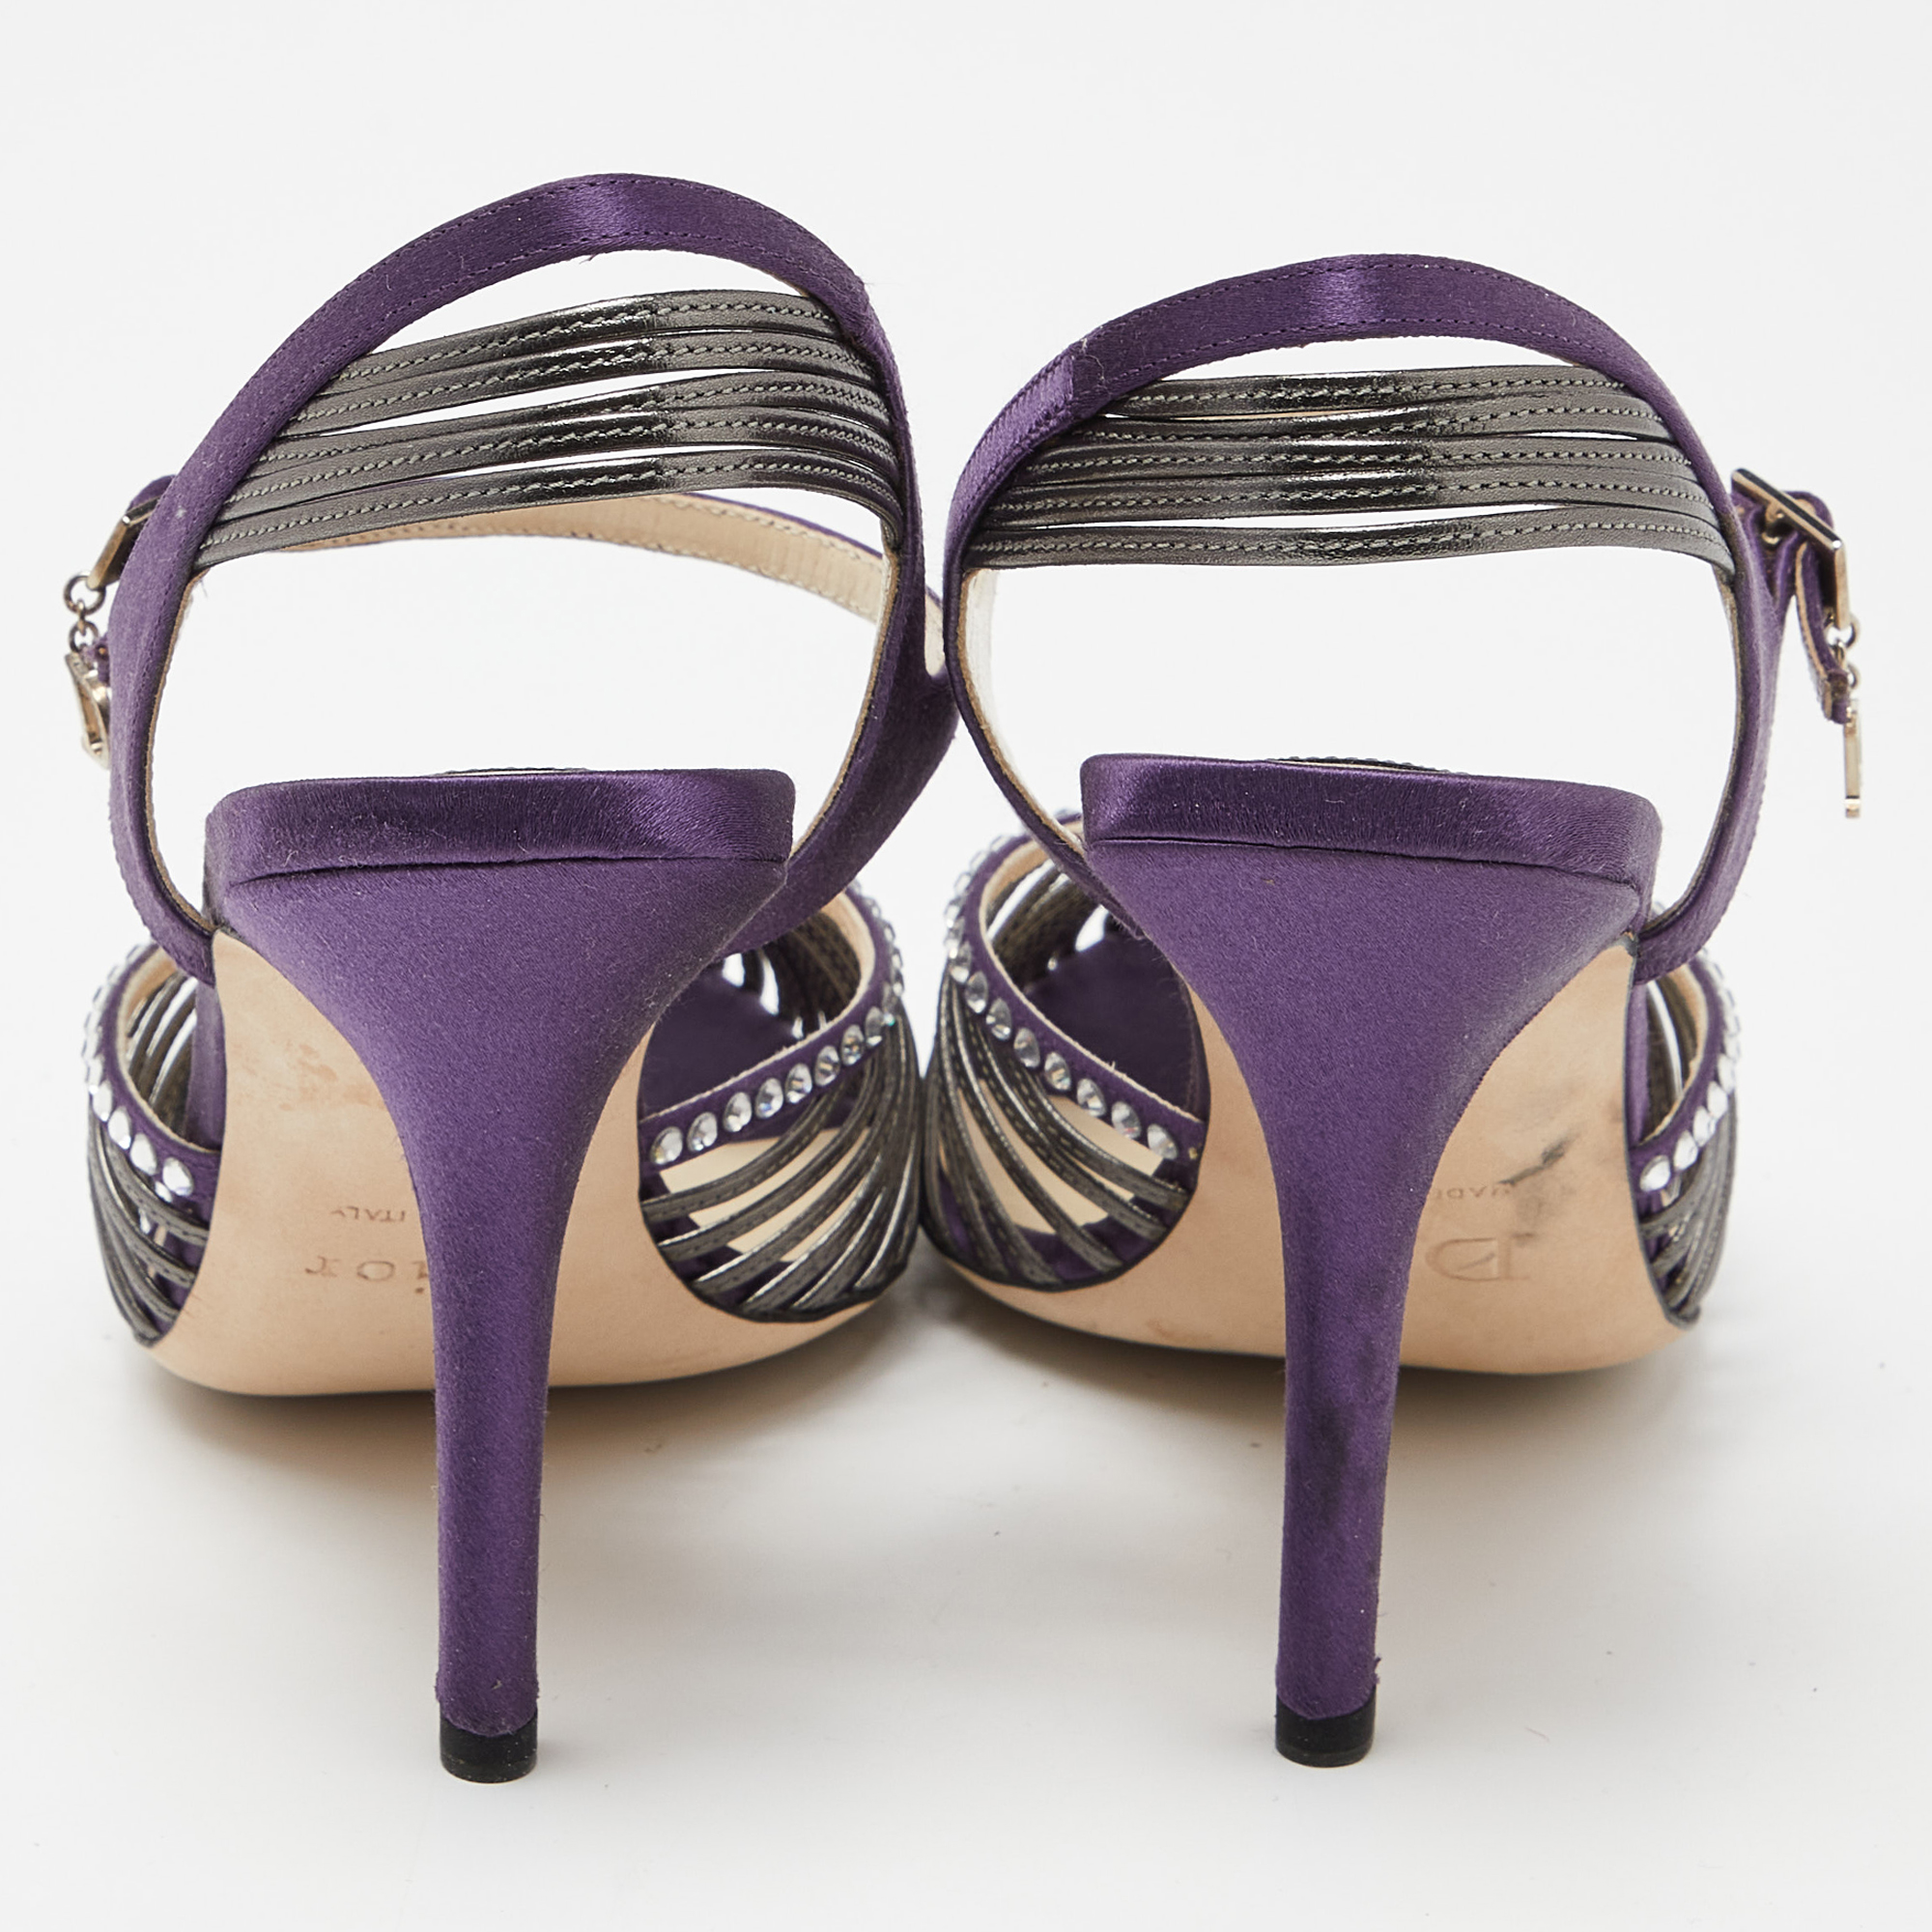 Dior Purple/Grey Satin And Leather Strappy Ankle Strap Sandals Size 38